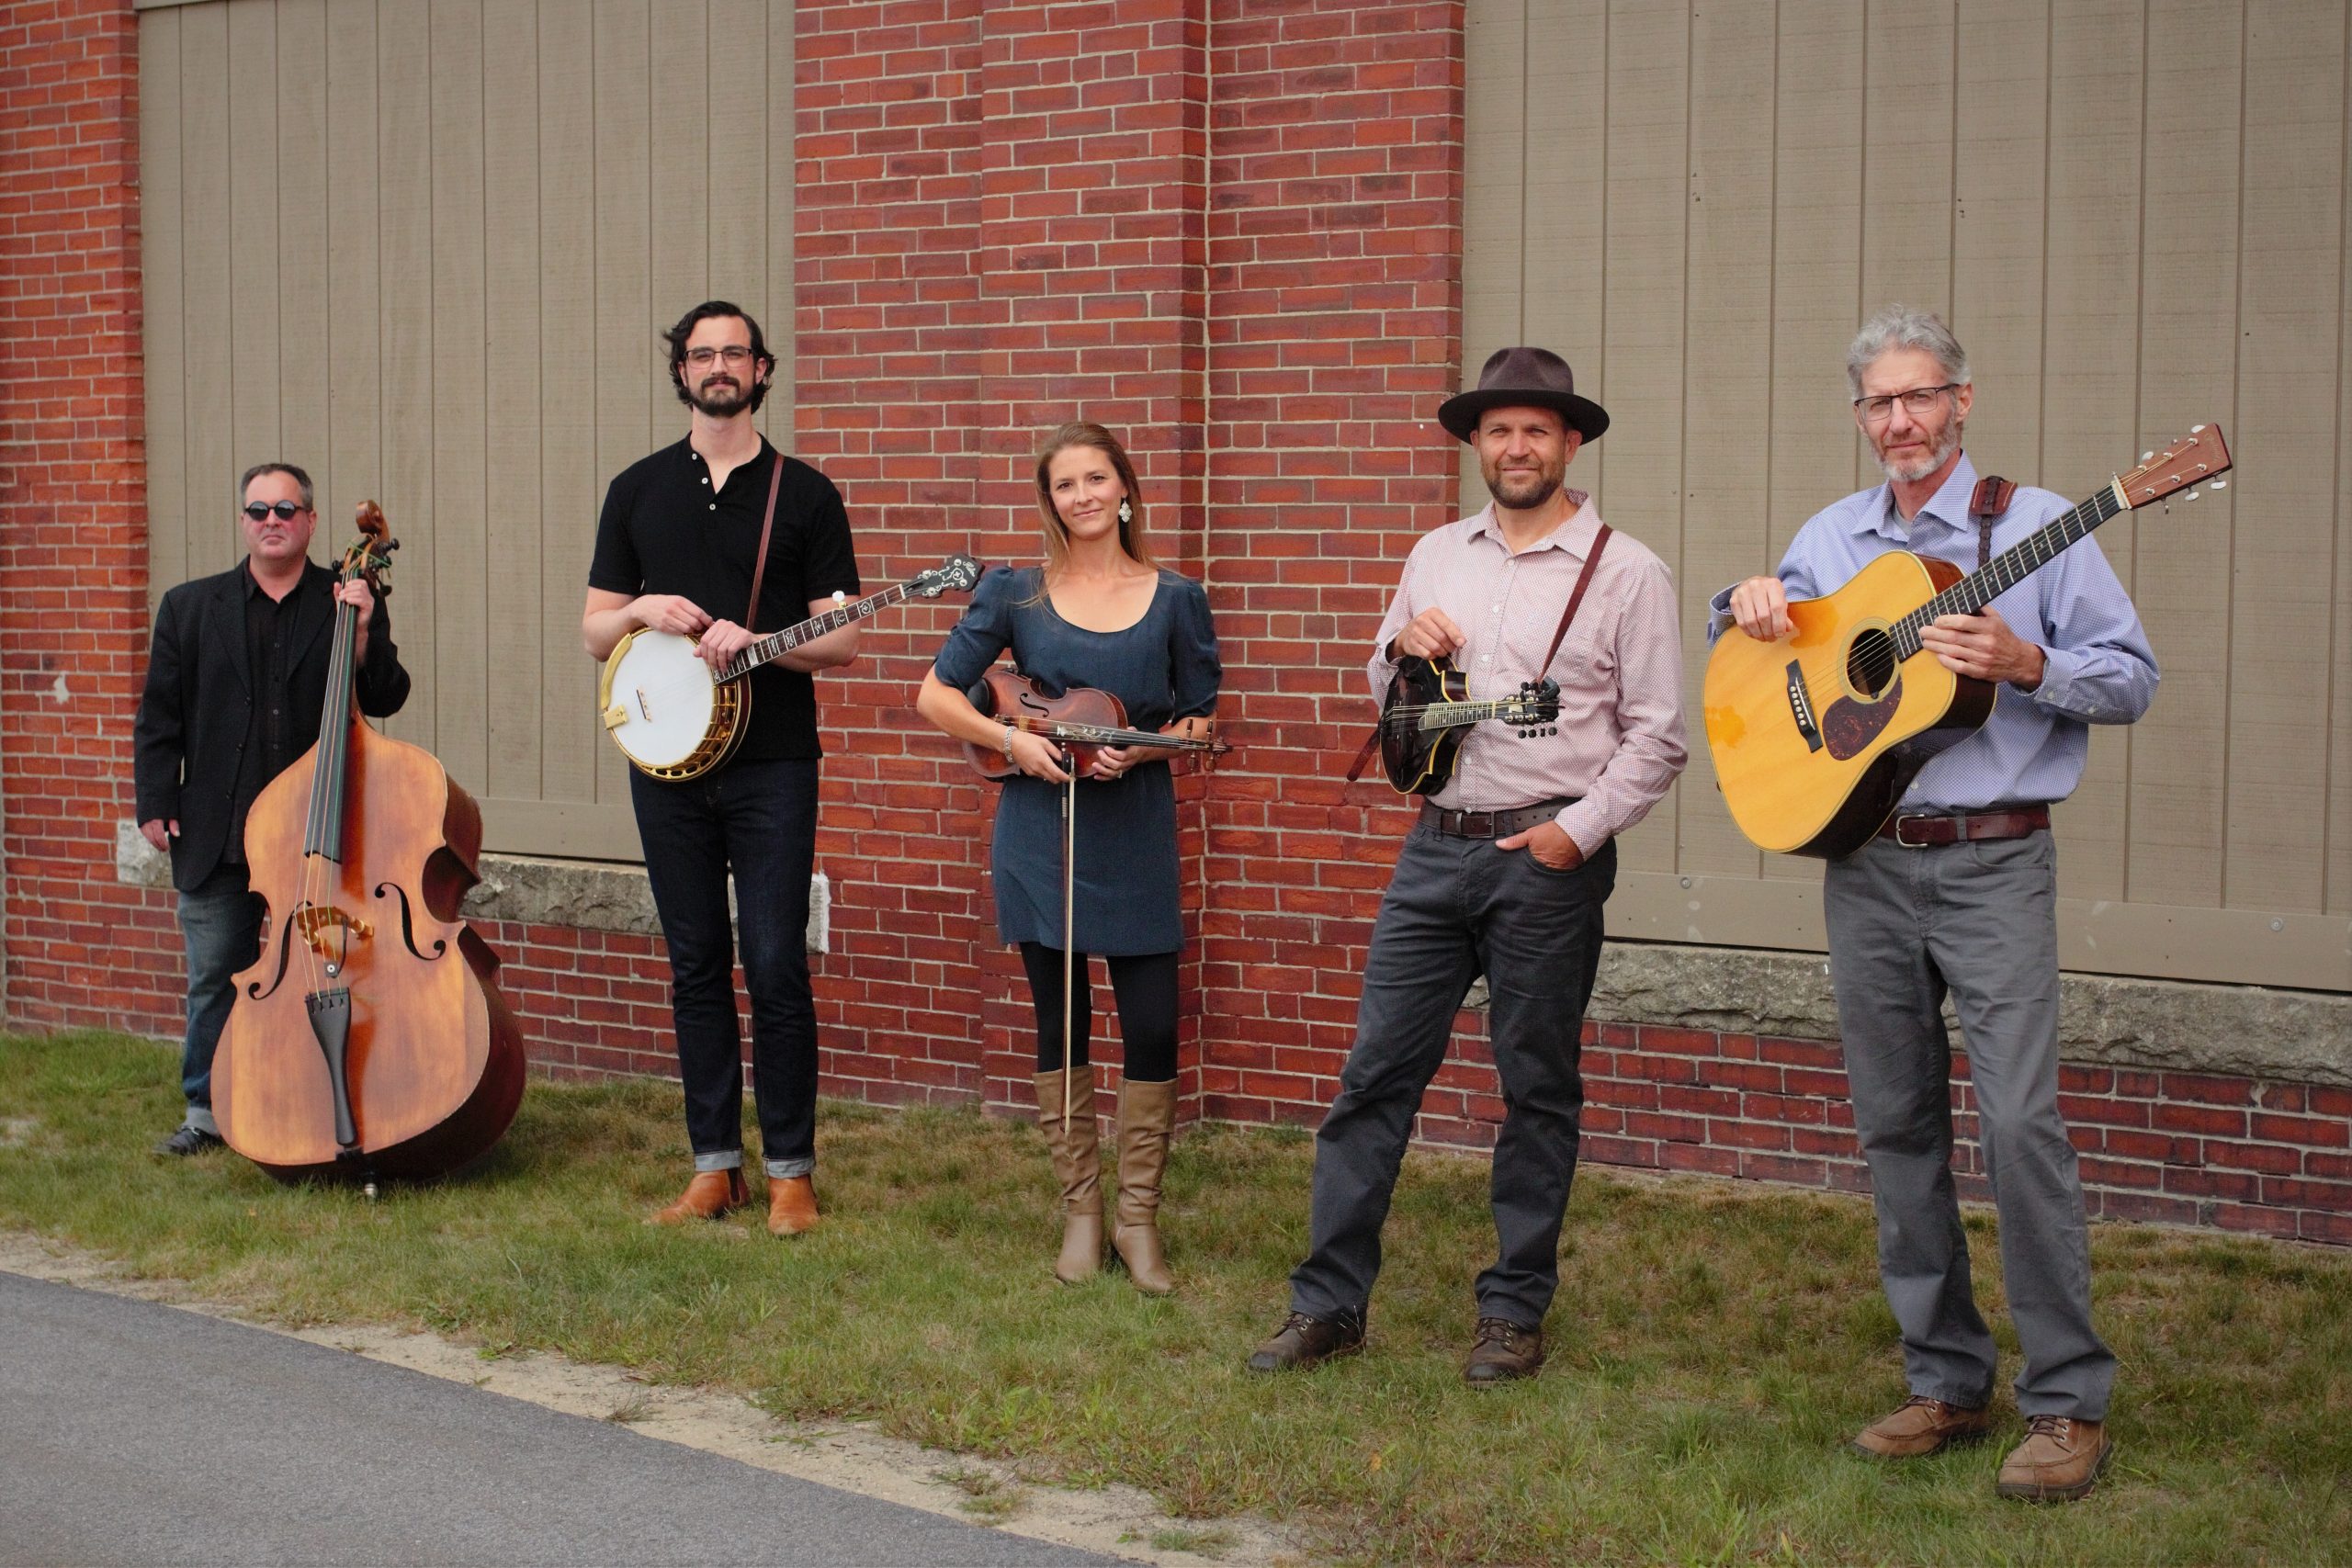 Erica Brown & the Bluegrass Connection